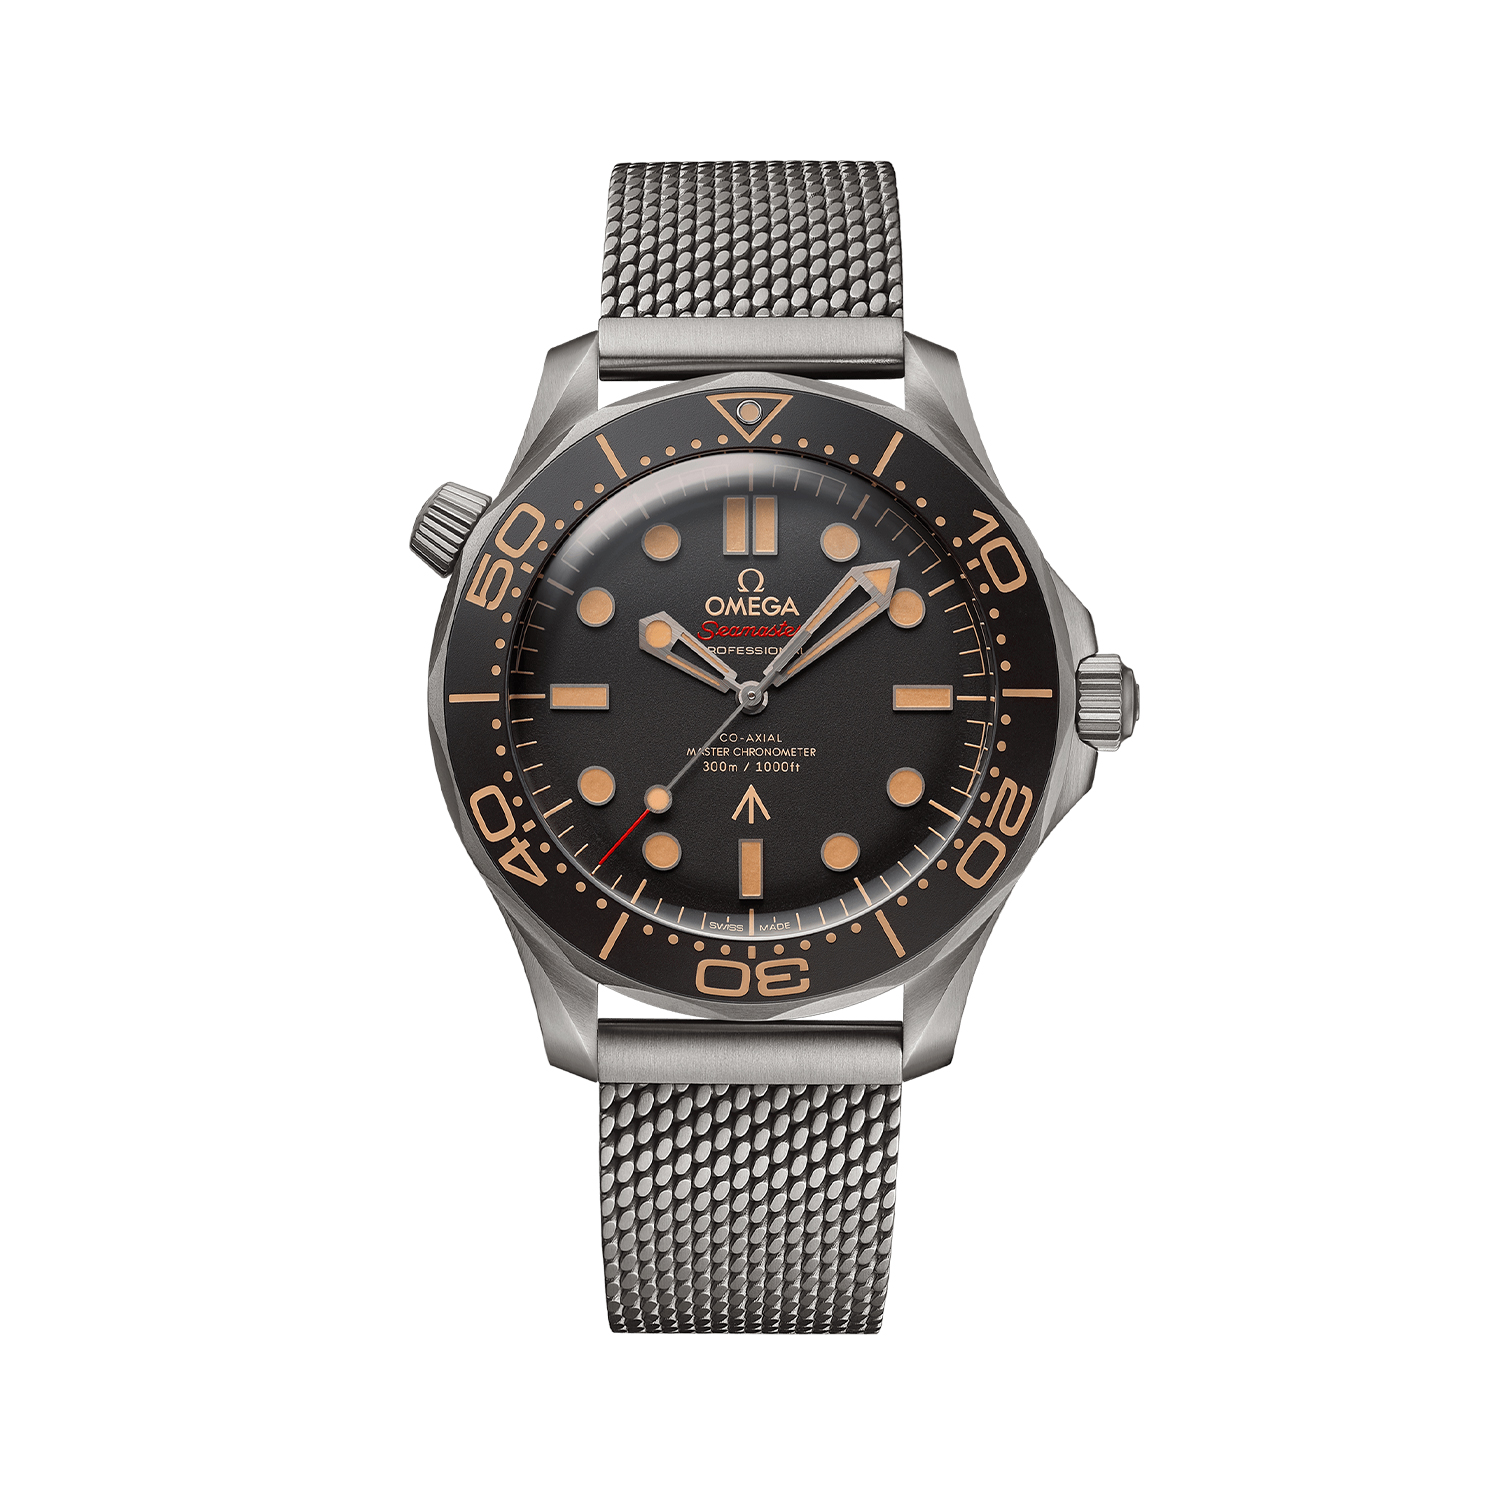 Montre diver 300m co‑axial master chronometer 42mm - Omega